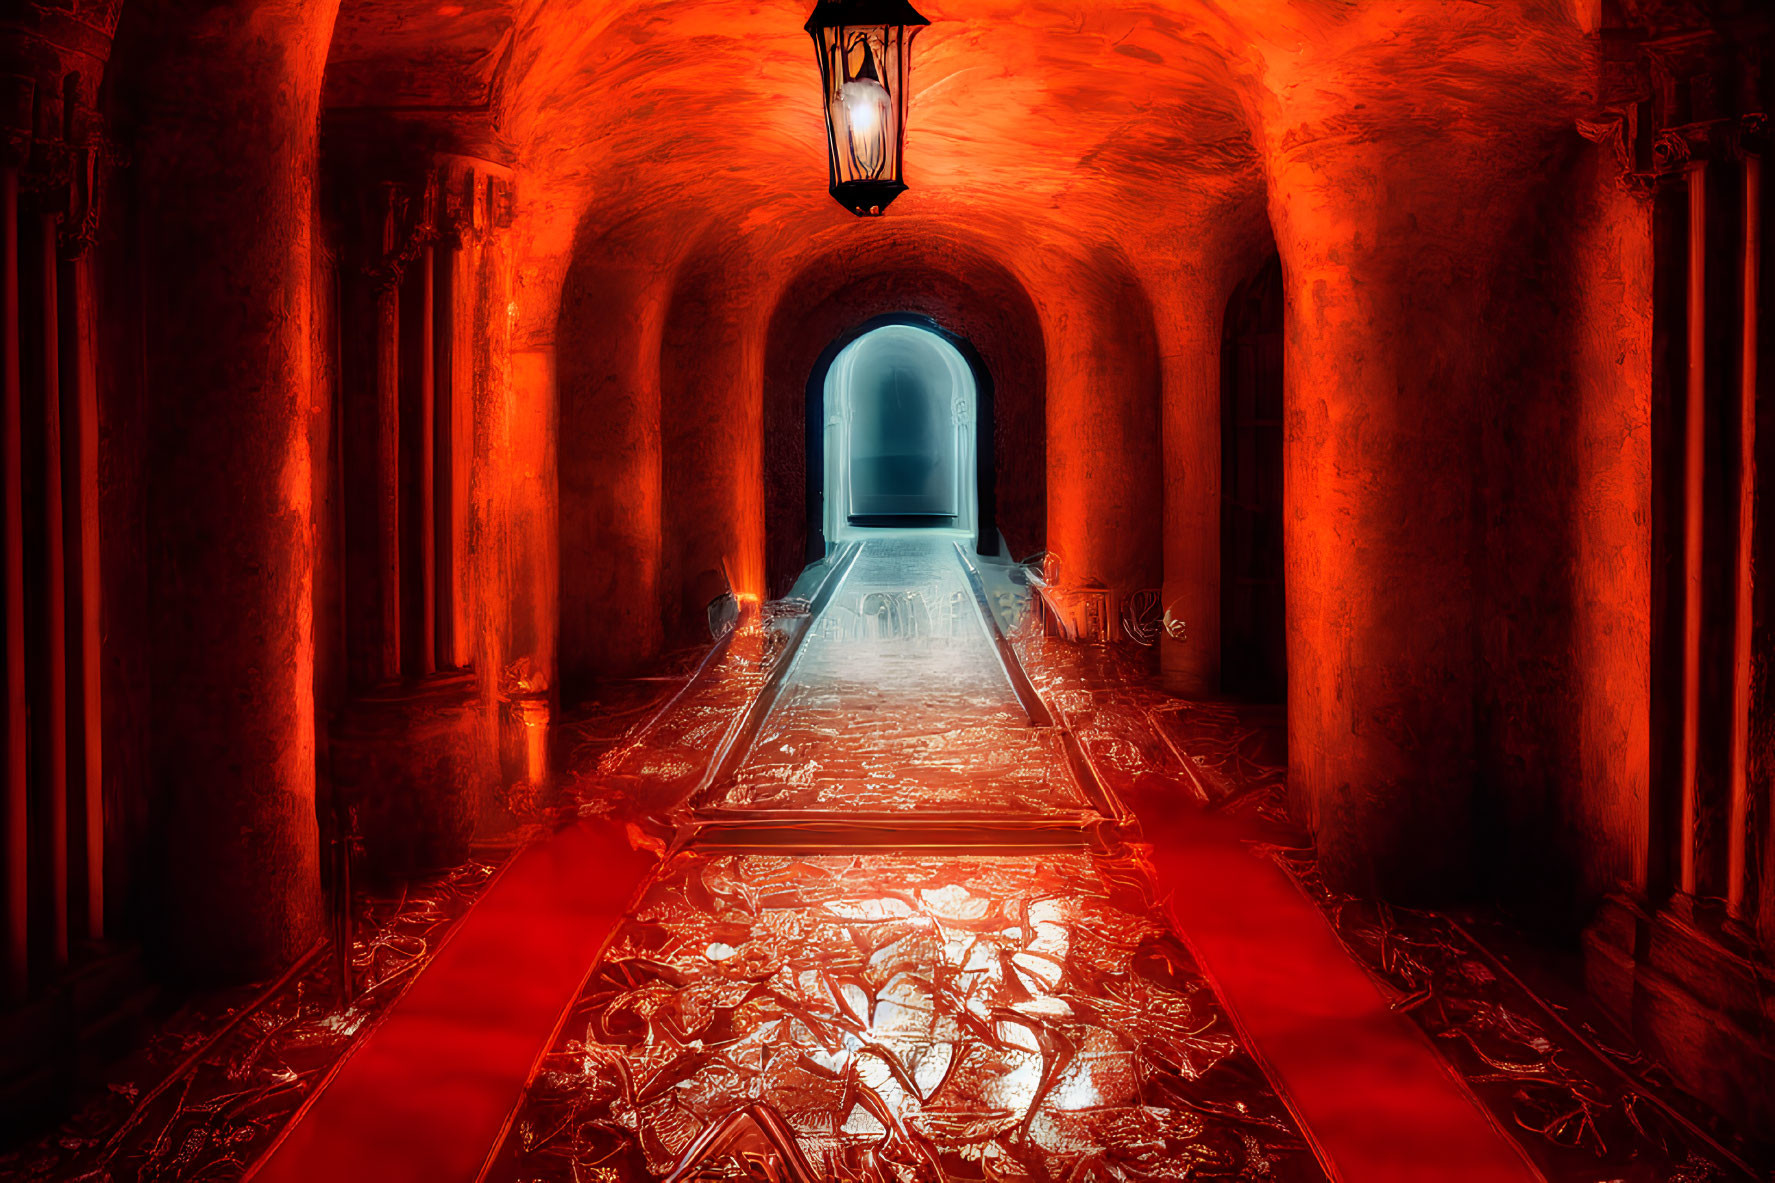 Gothic corridor with red lighting, arched ceilings, ornate columns, red carpet, and